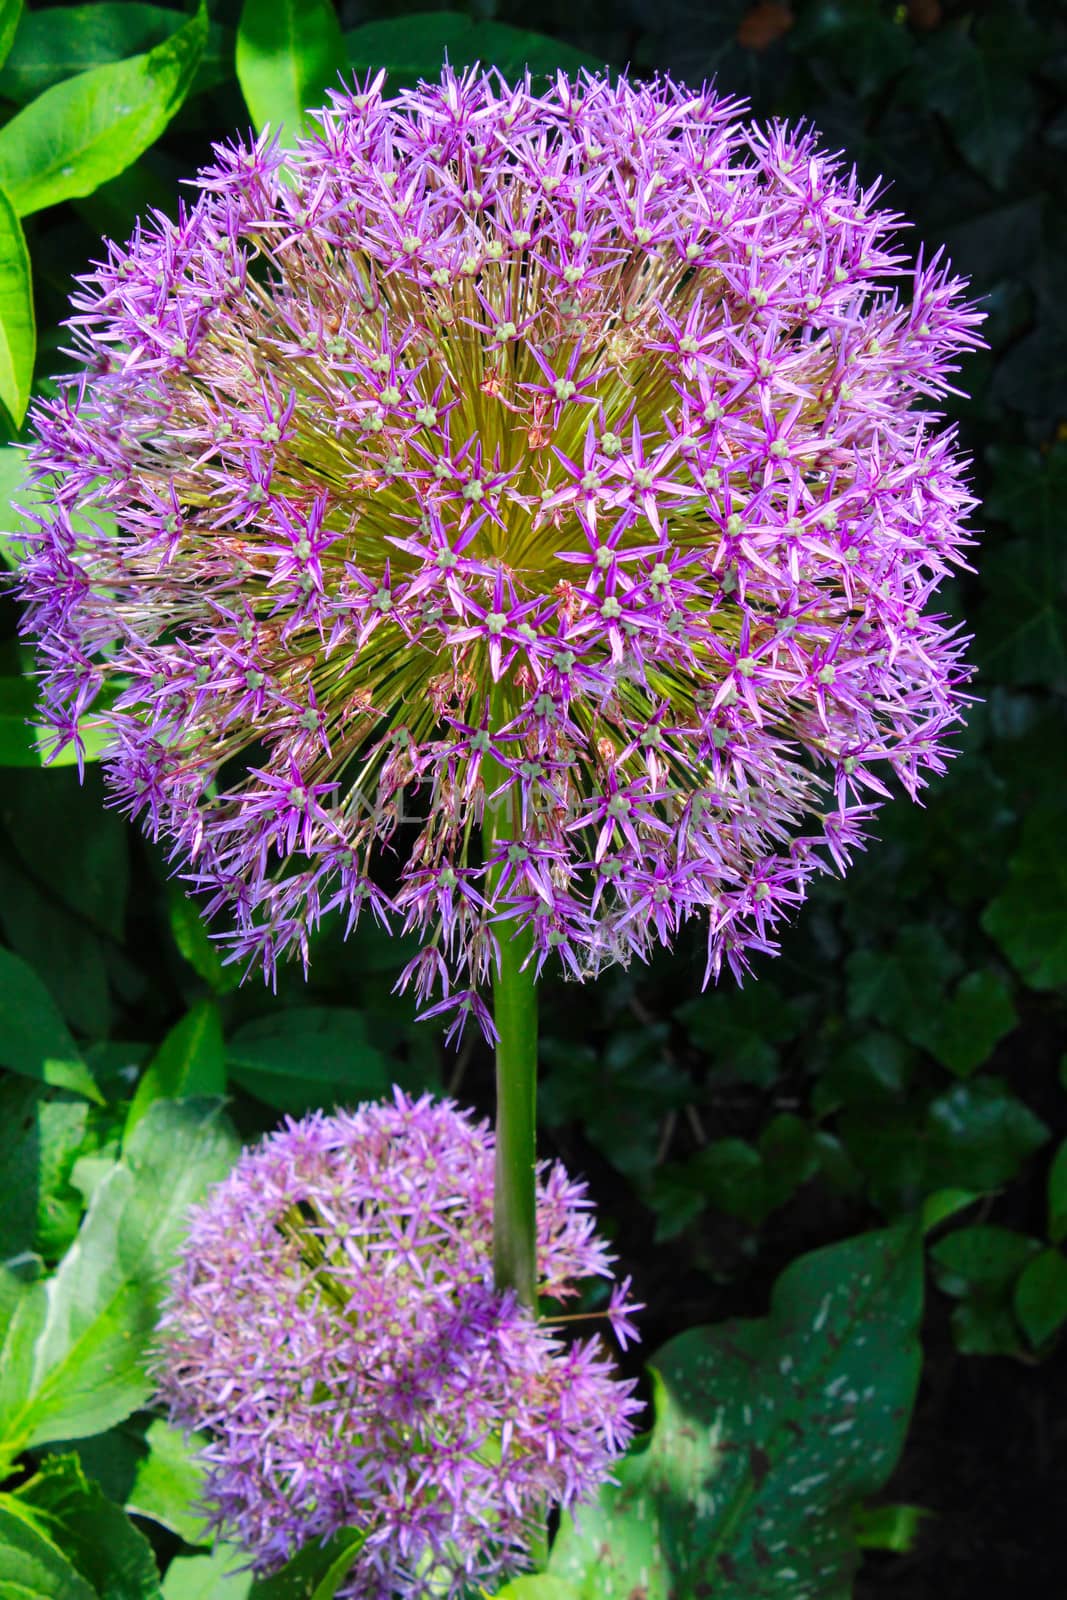 Globe thistle flowers come in white or purple and is a perennial plant.